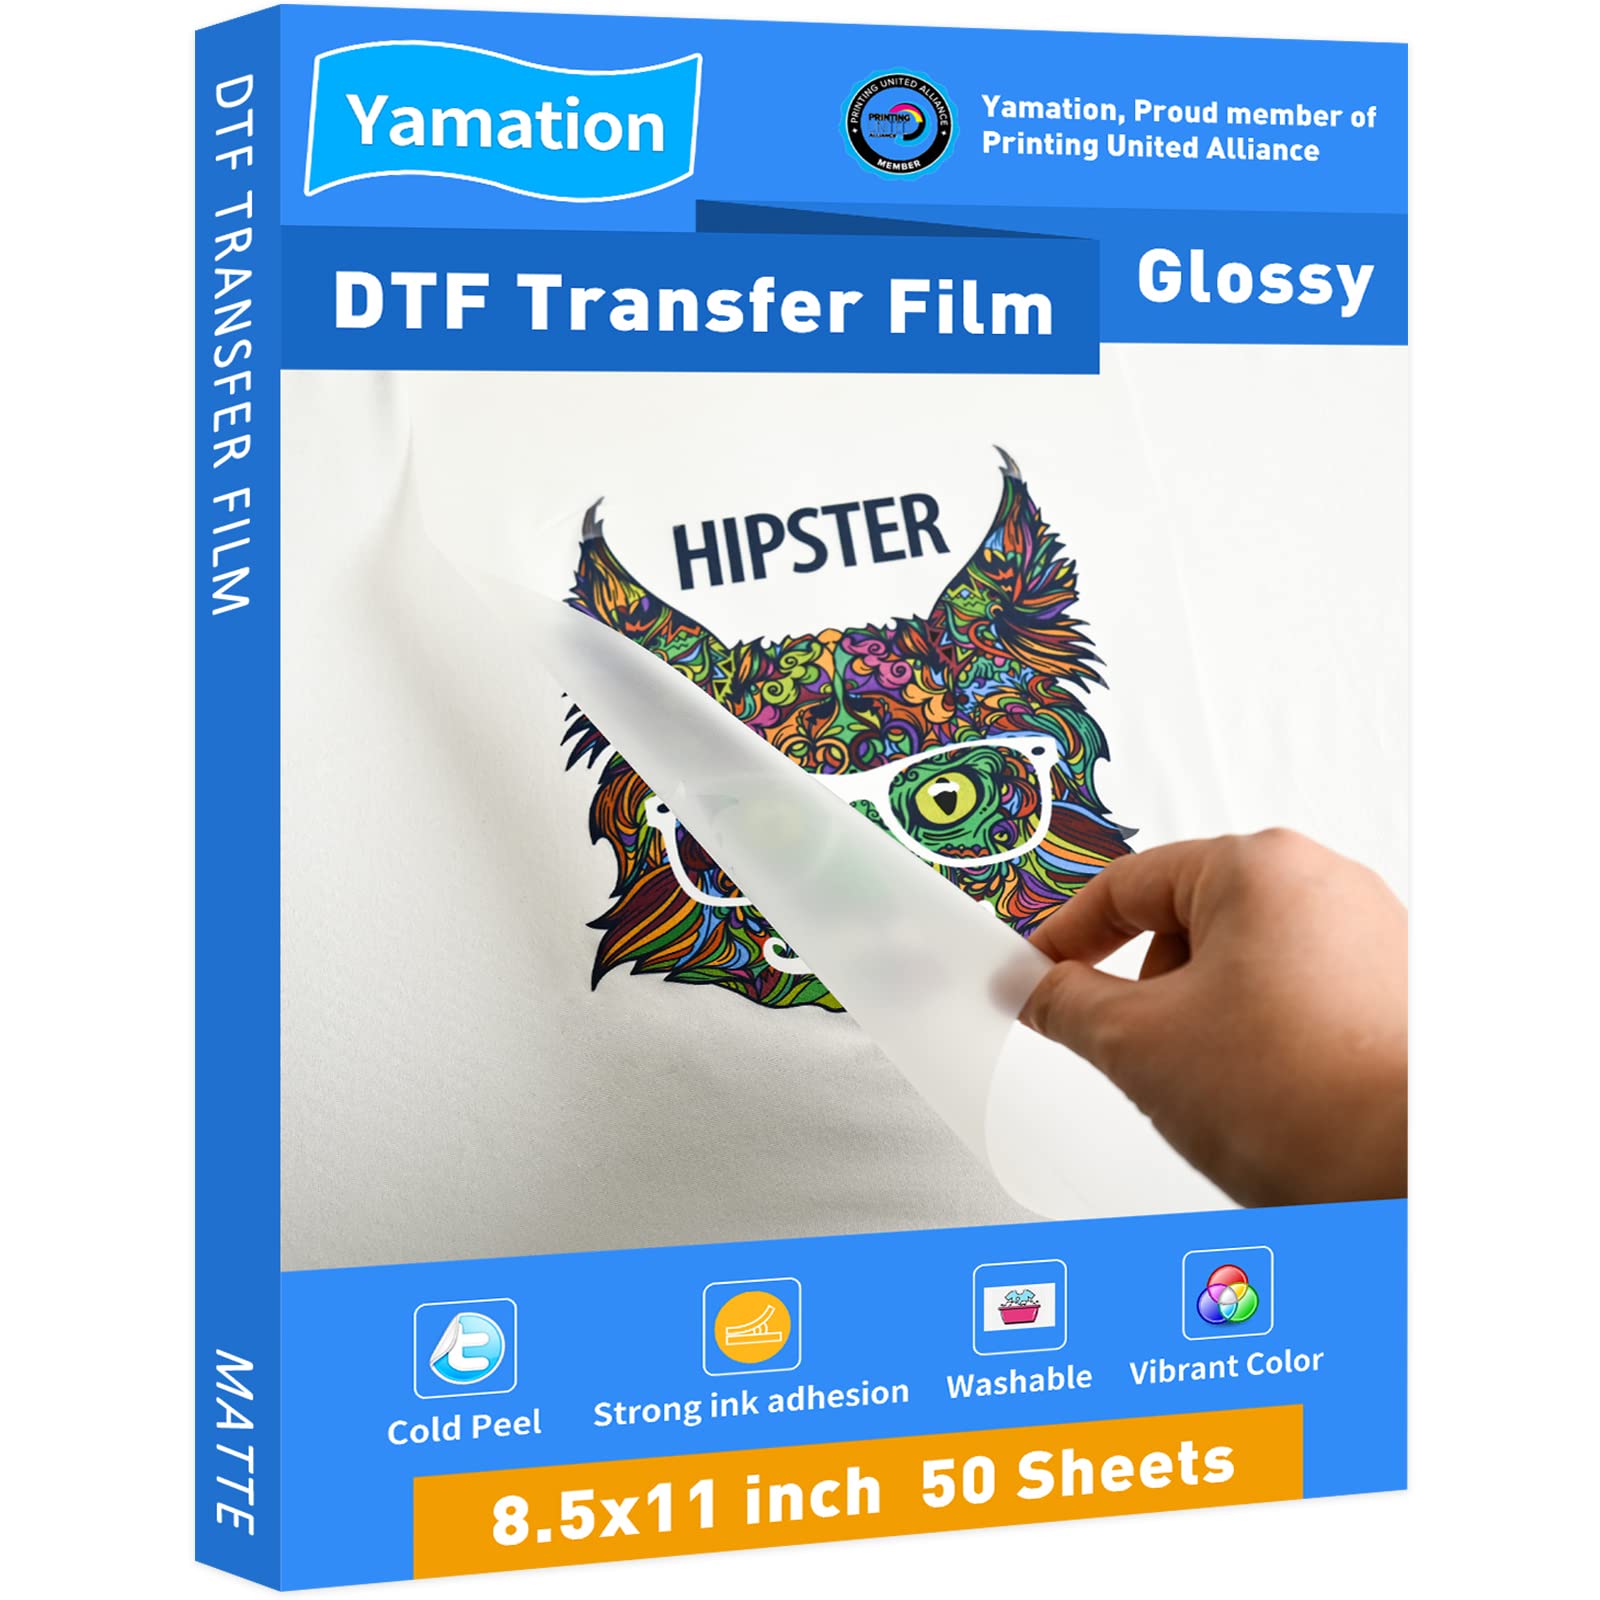 DTF Transfer Film Glossy - 8.5x11 inch - 50 Sheets - PET Paper Clear for  Tshirt 